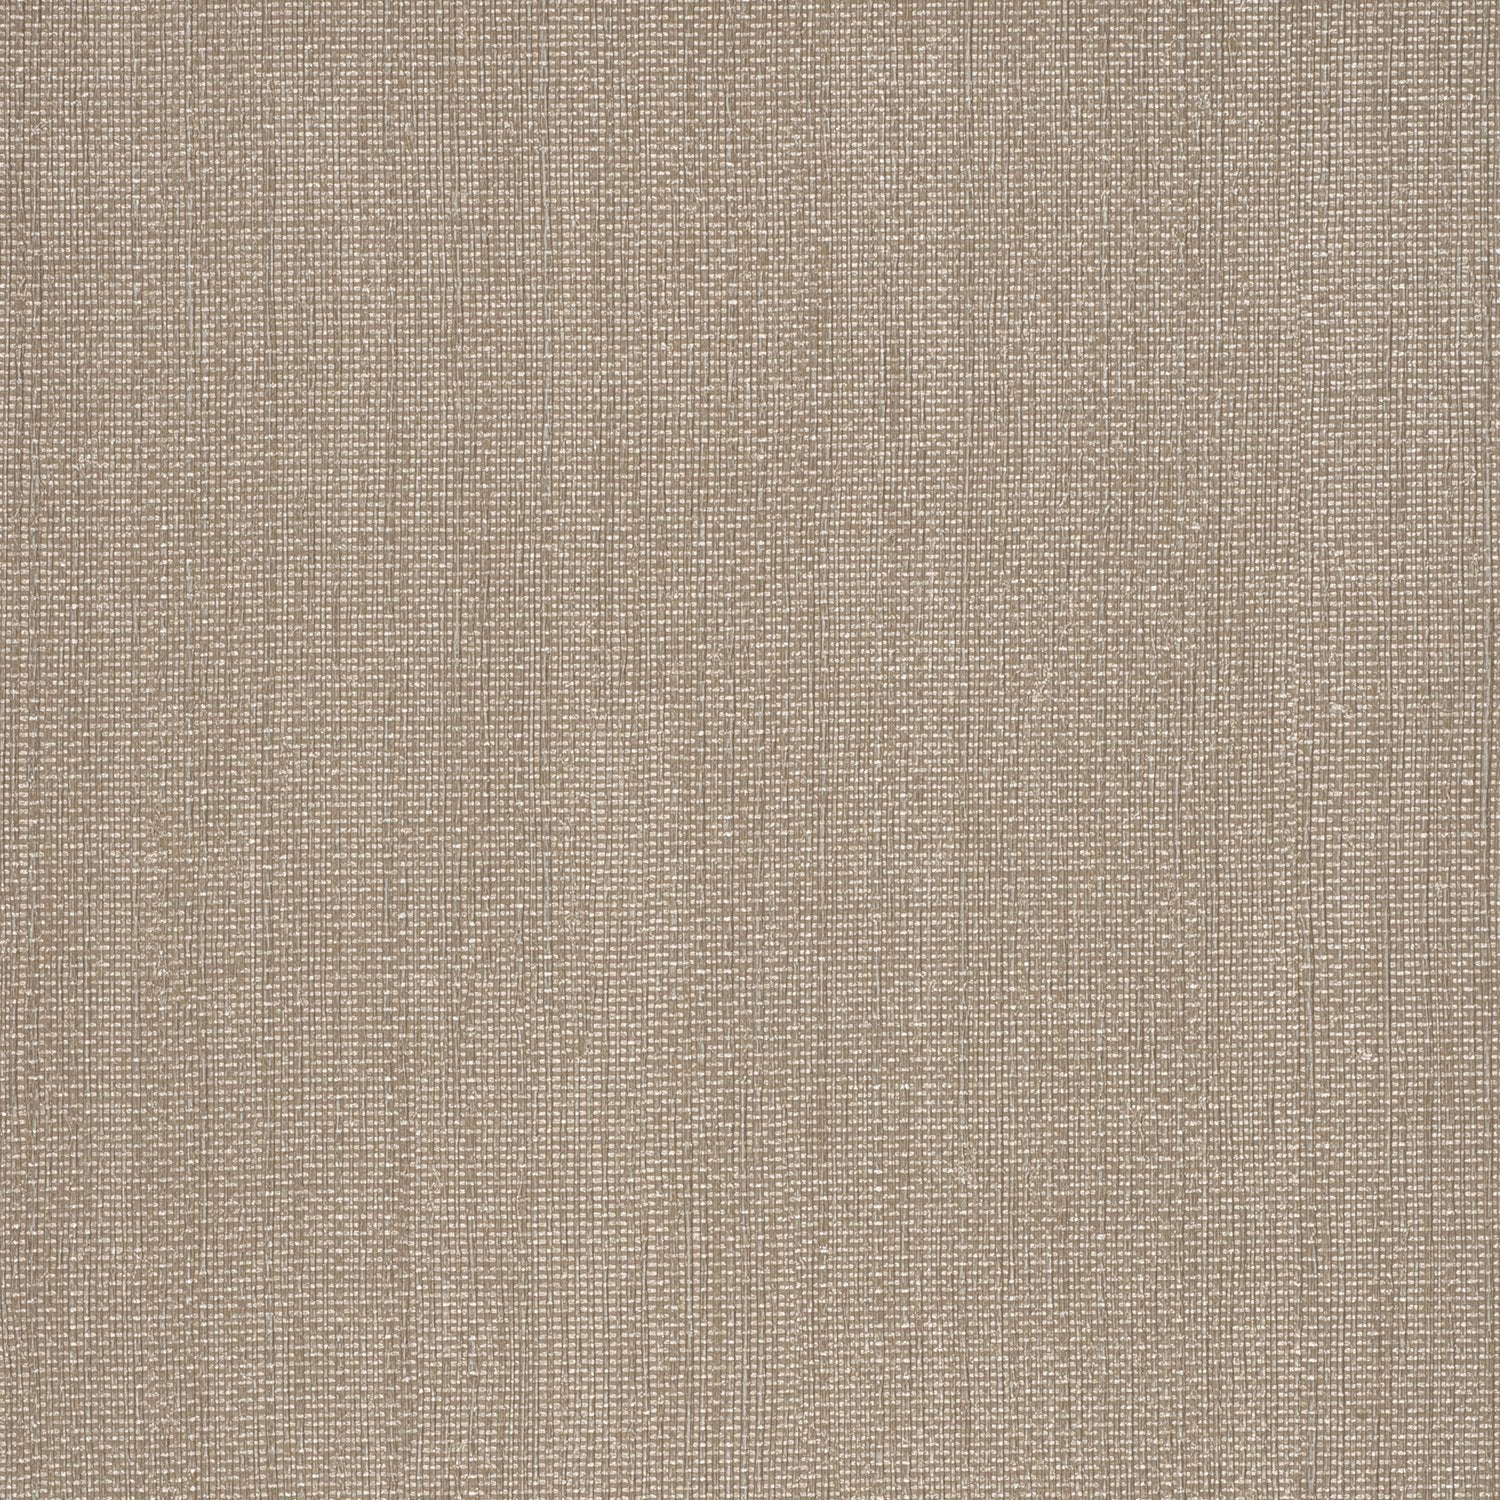 Theory - Y46437 - Wallcovering - Vycon - Kube Contract